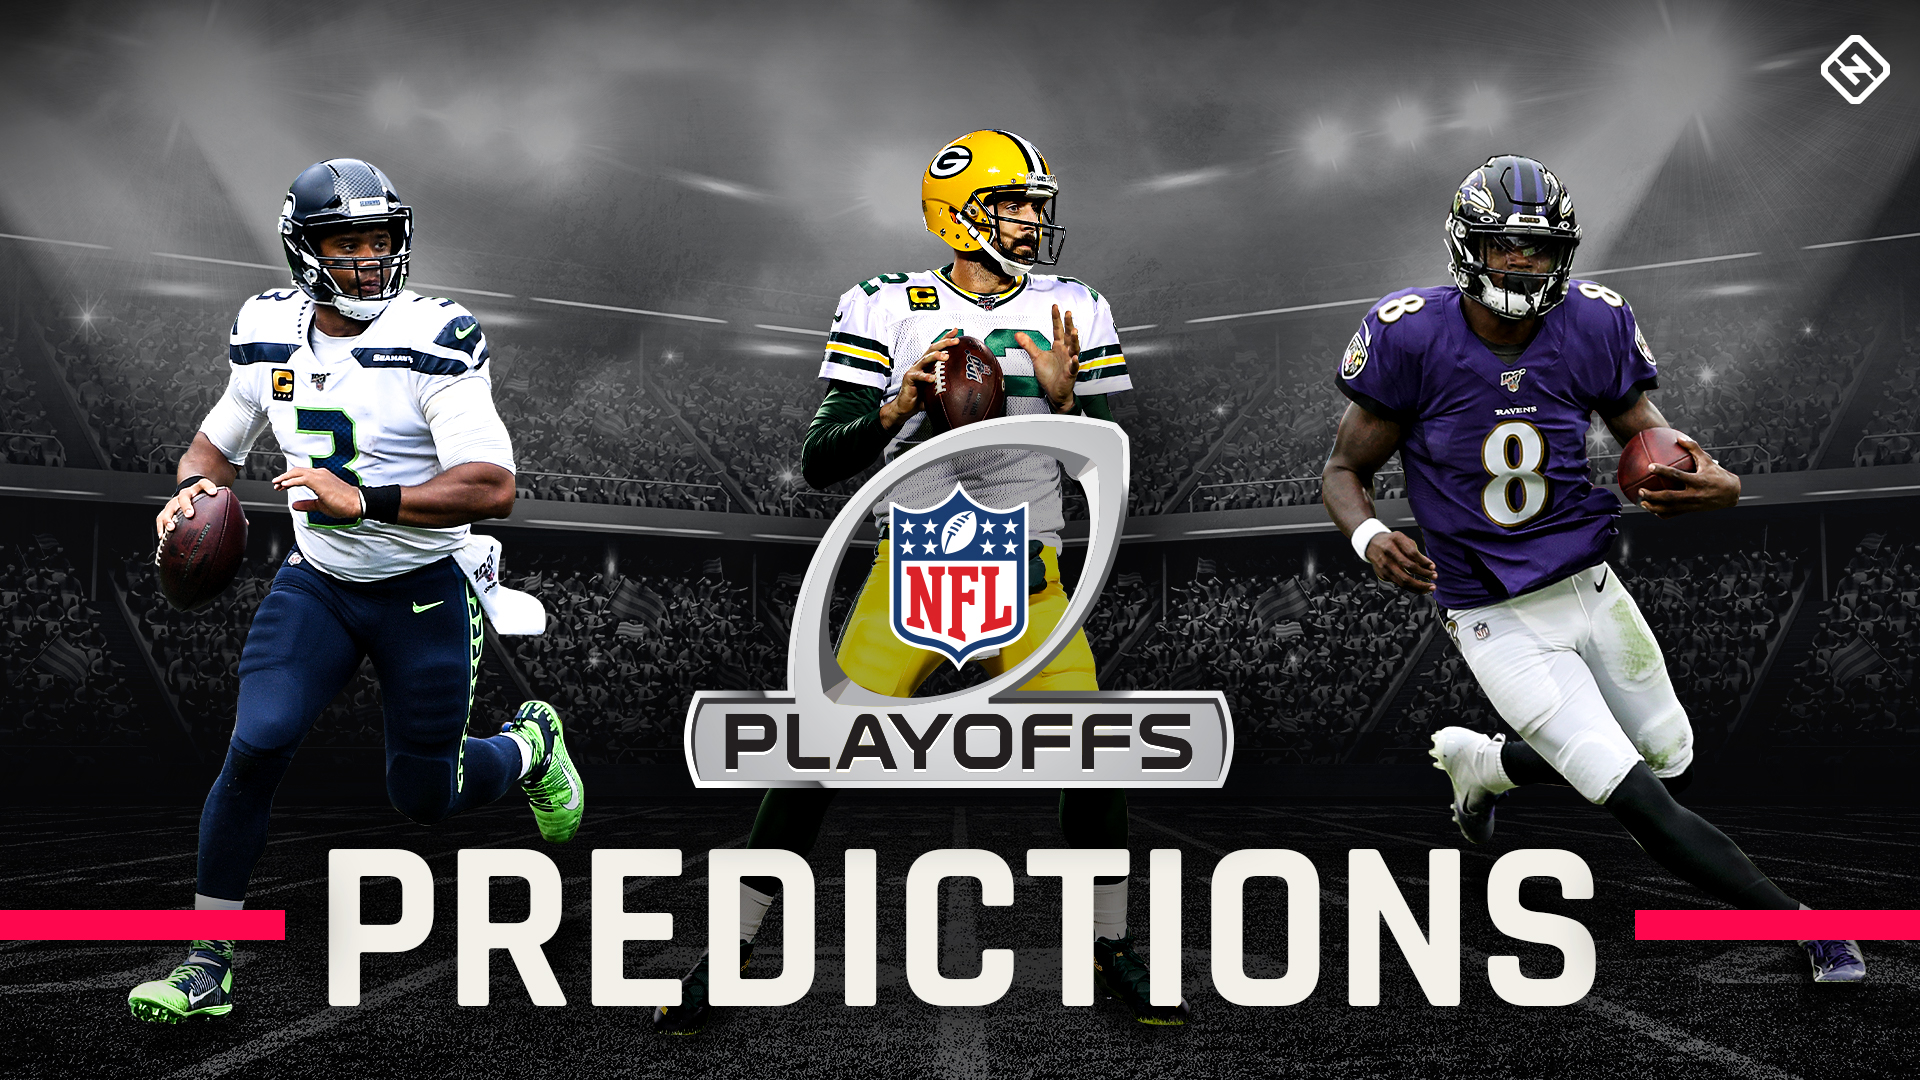 NFL playoff picks, predictions for AFC, NFC brackets